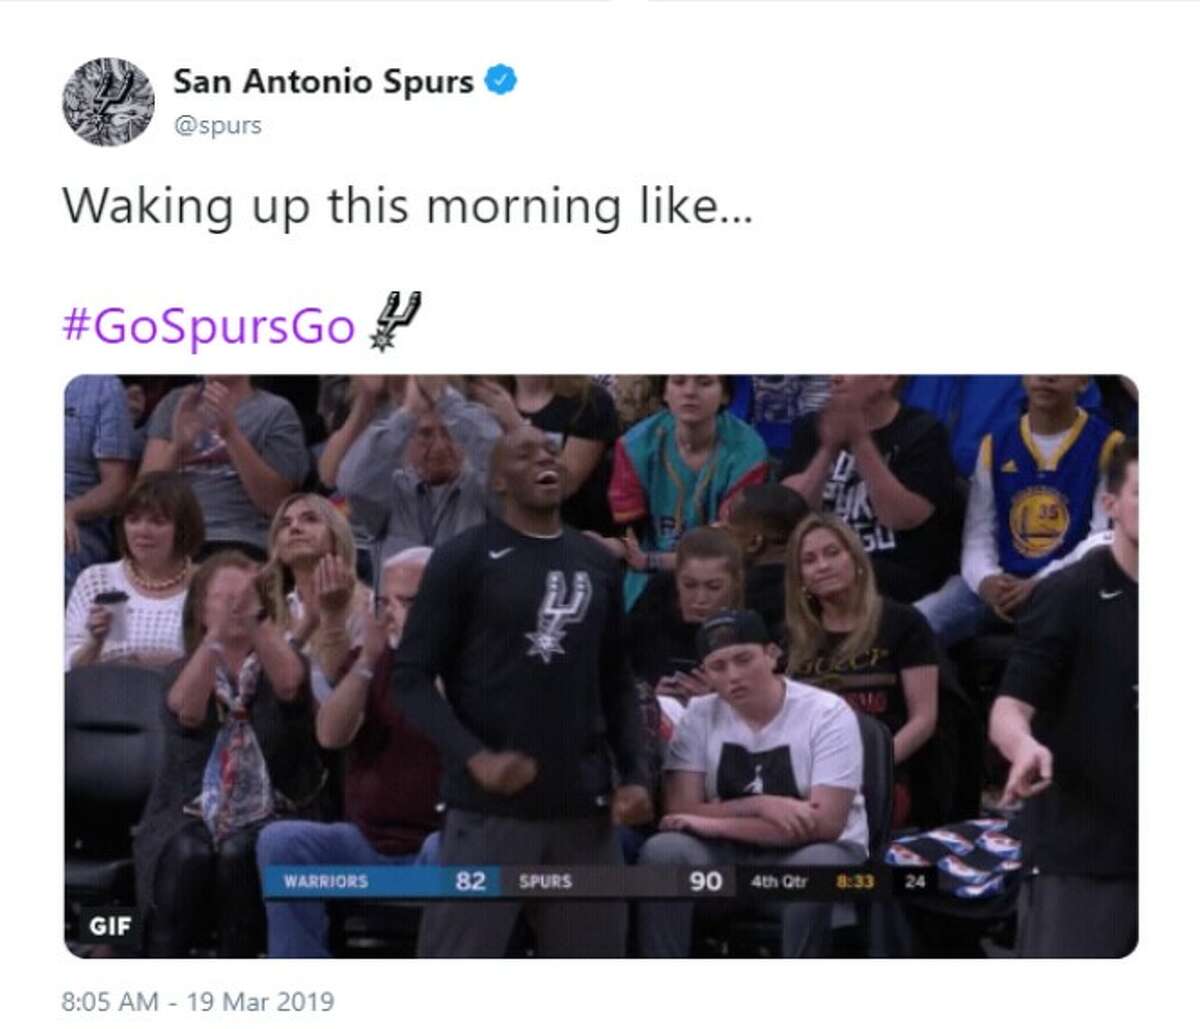 @spurs: Waking up this morning like...